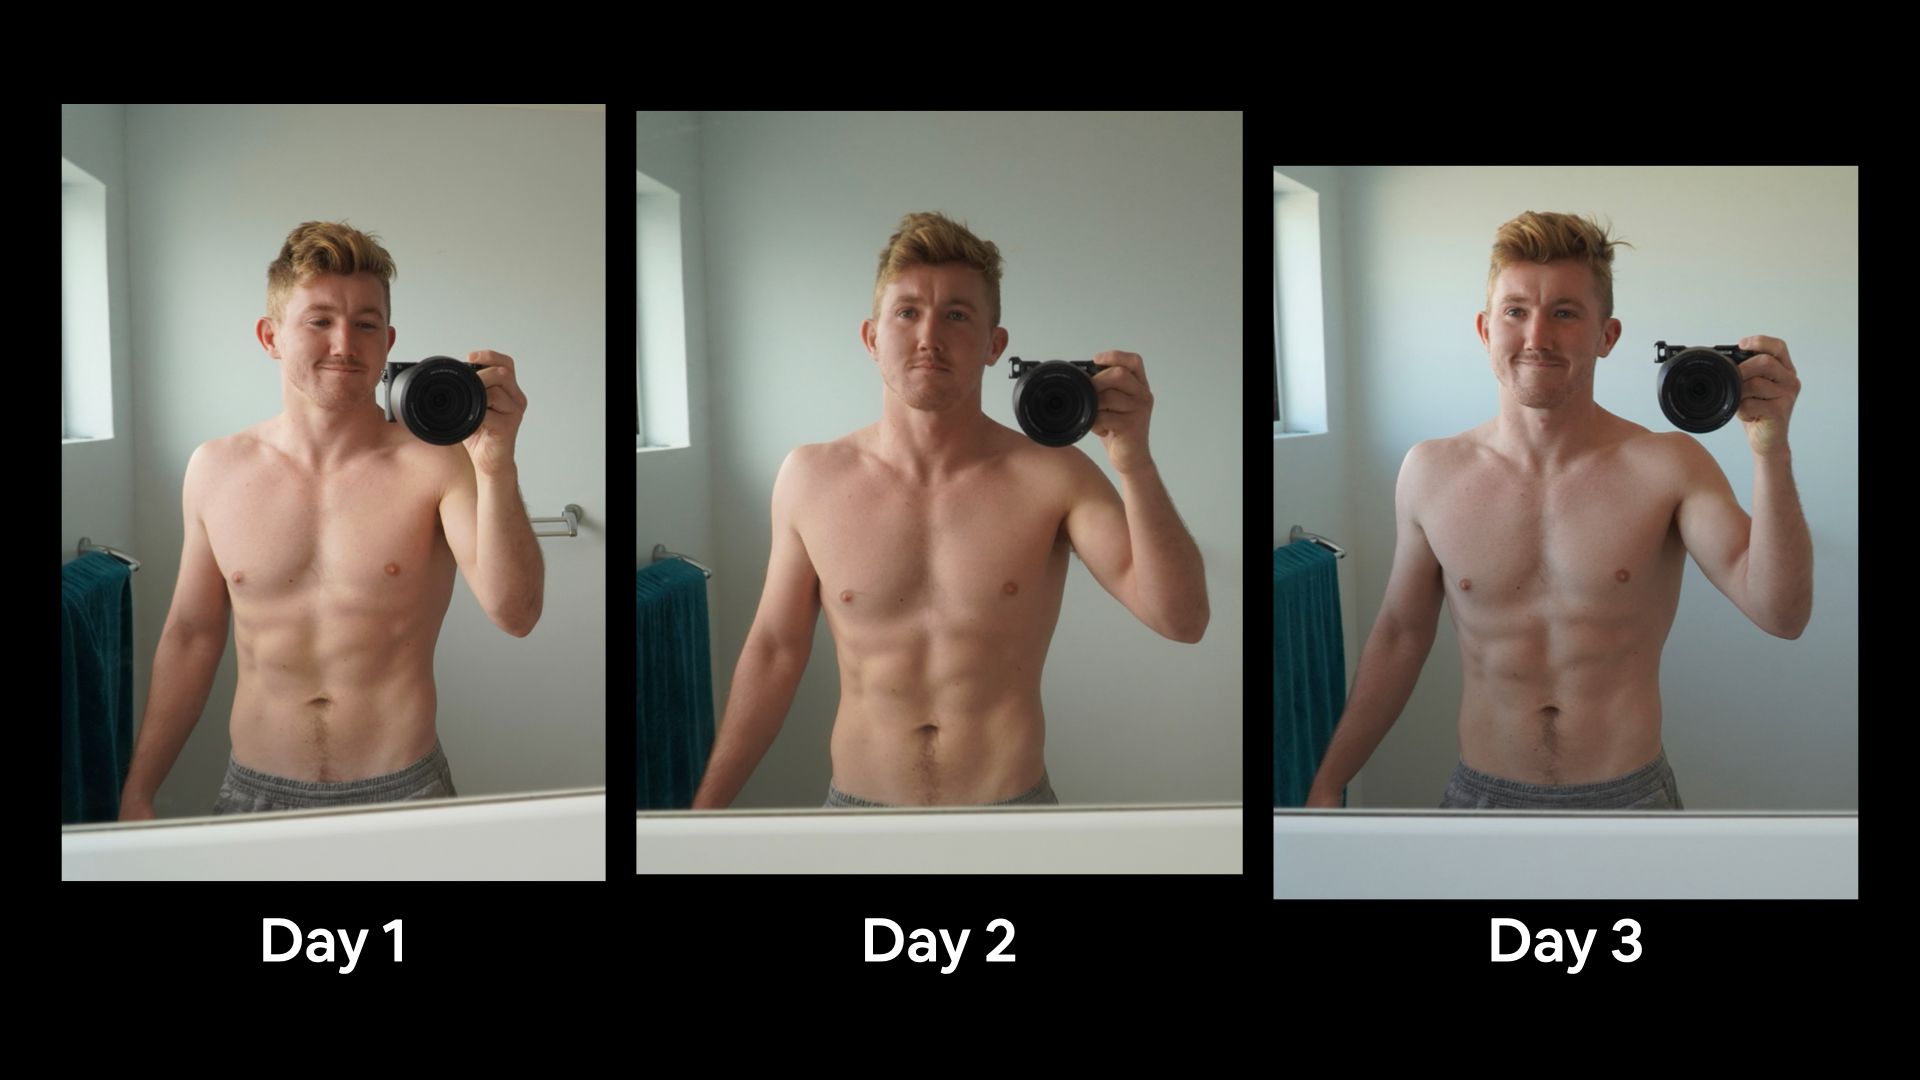 I didn't eat food for 3 days, here's what happened